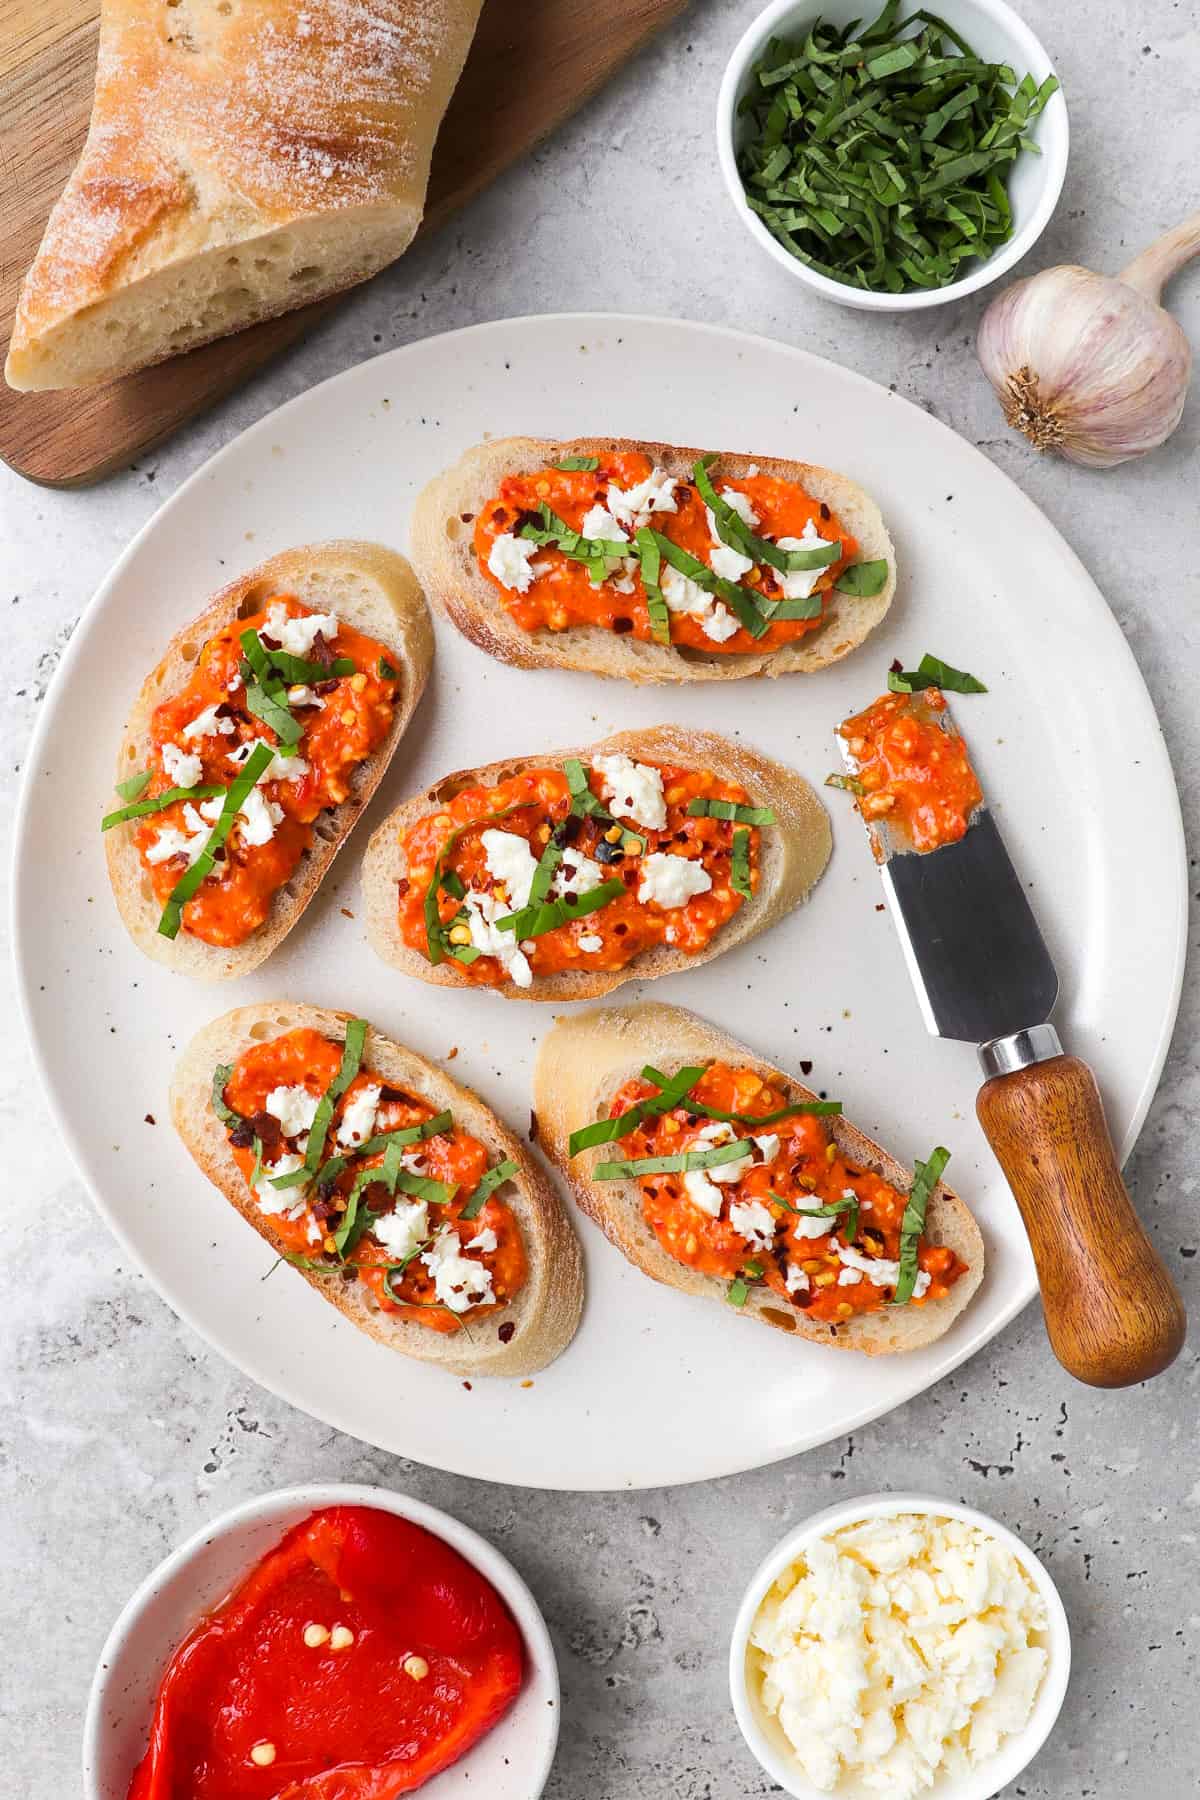 Crostini with paprika dip topped with feta, basil and chili flakes. Baguette, garlic, crumbled feta cheese, reasoned peppers on thee sides for garnish.